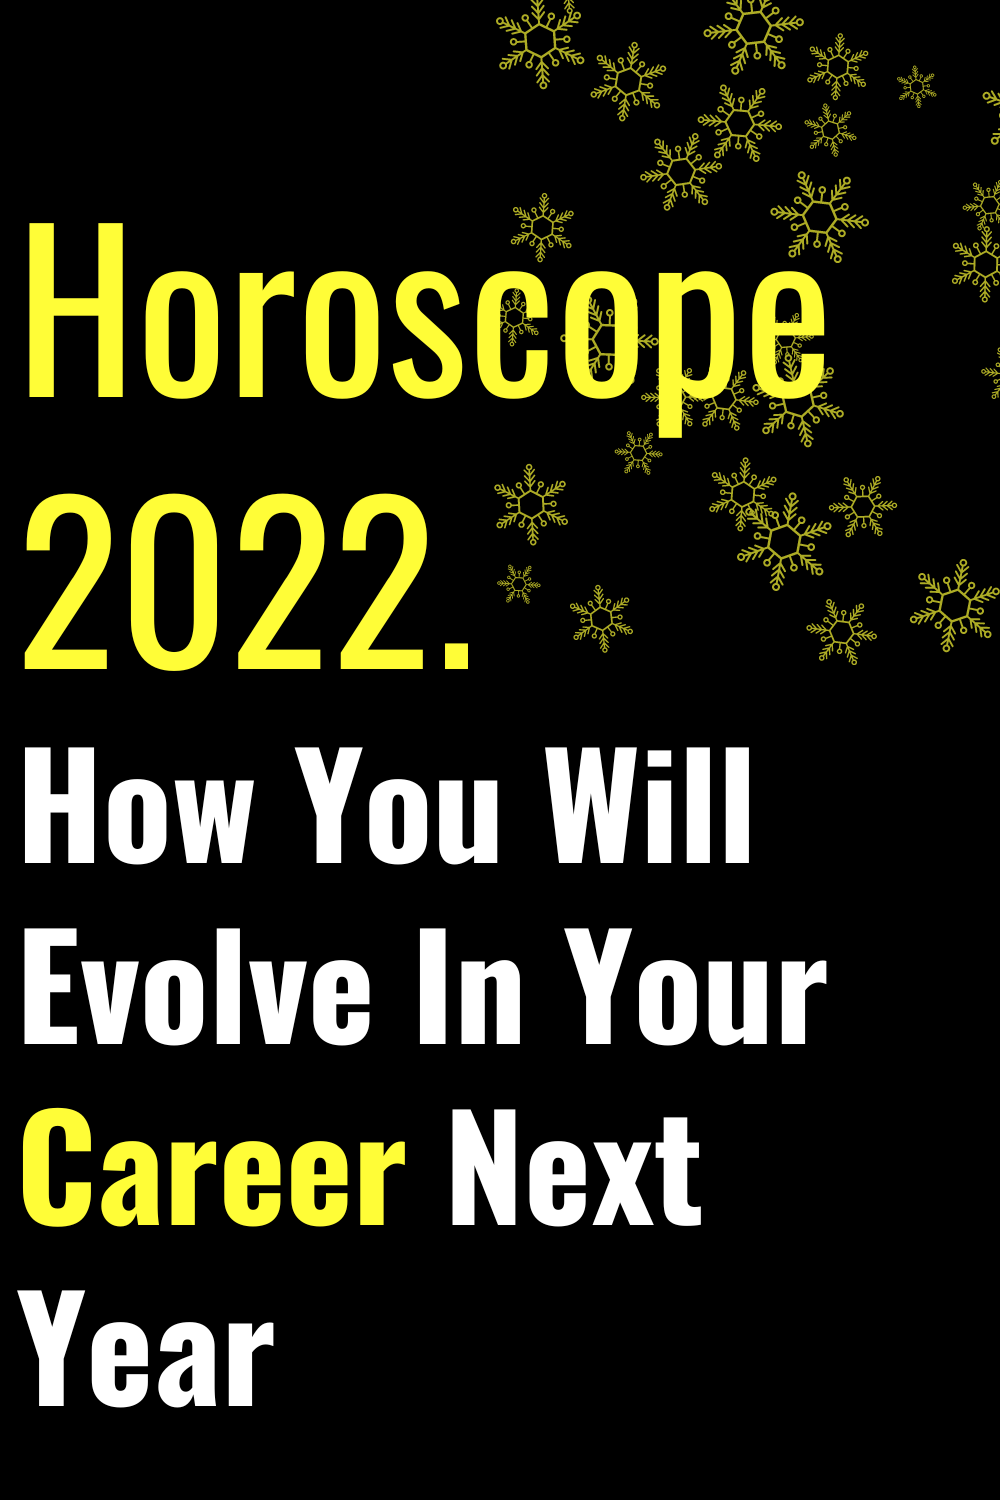 Horoscope 2022. How You Will Evolve In Your Career Next Year